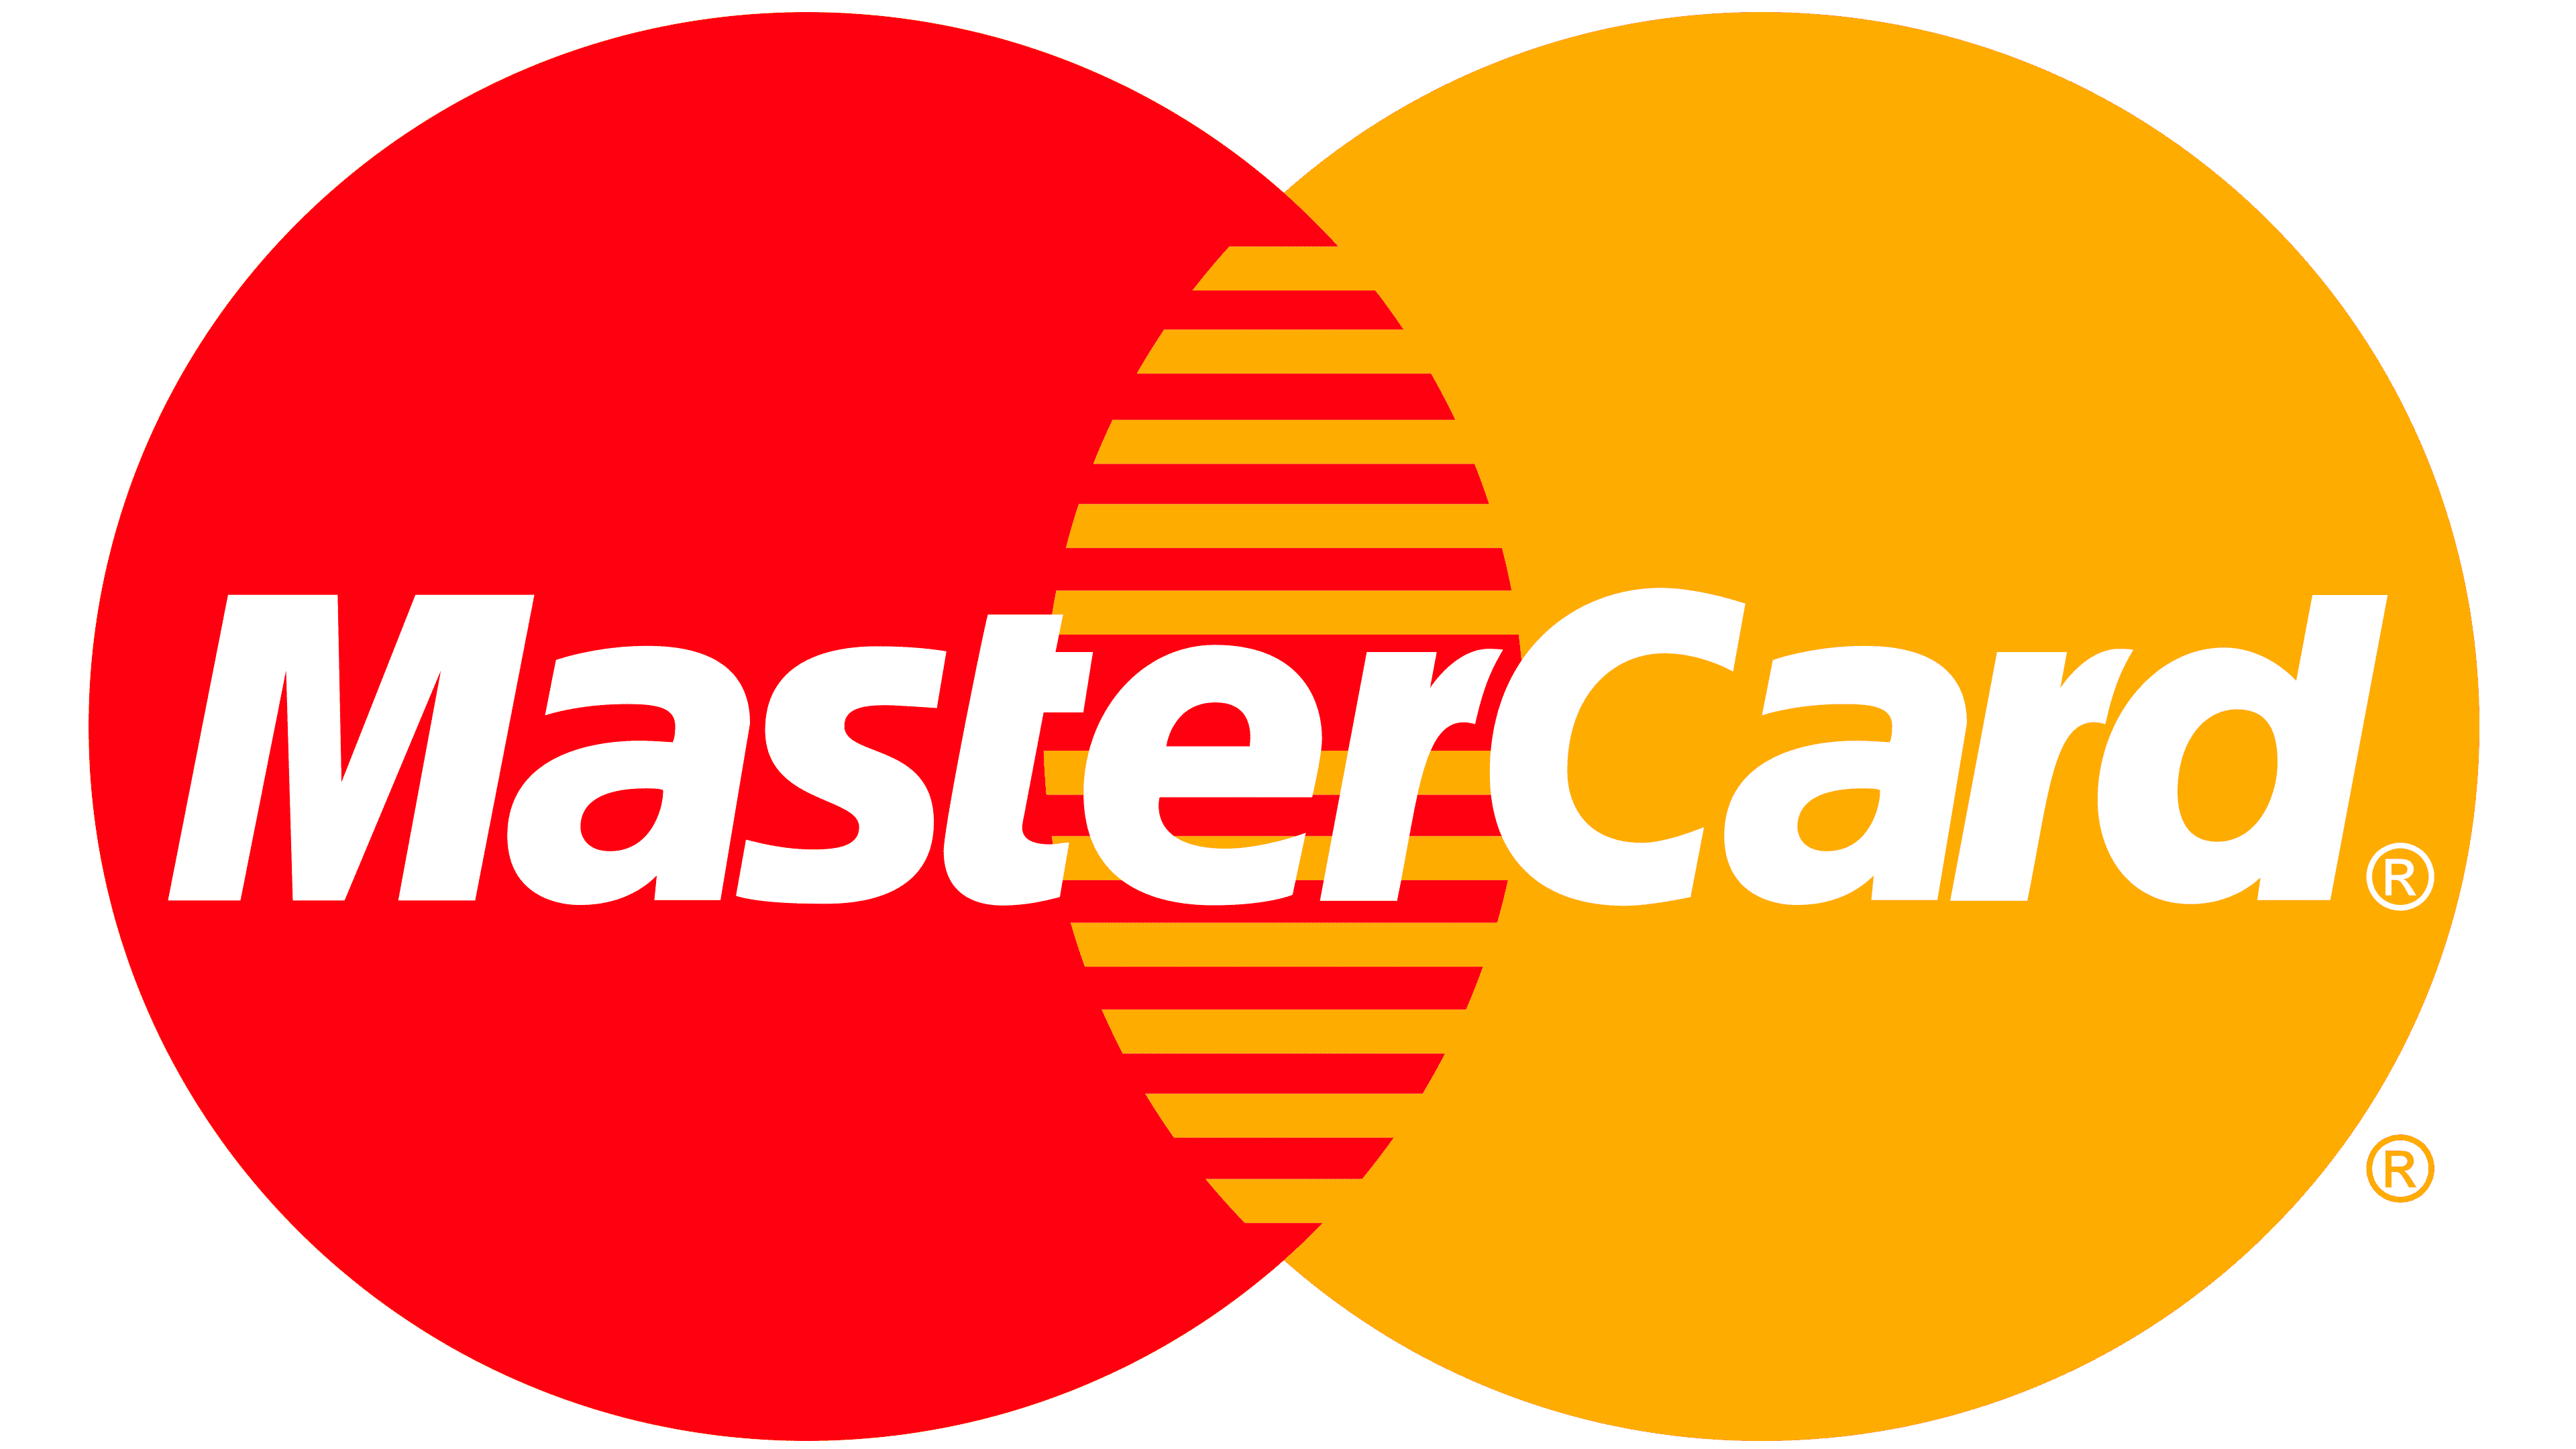 Mastercard Logo | The most famous brands and company logos in the world